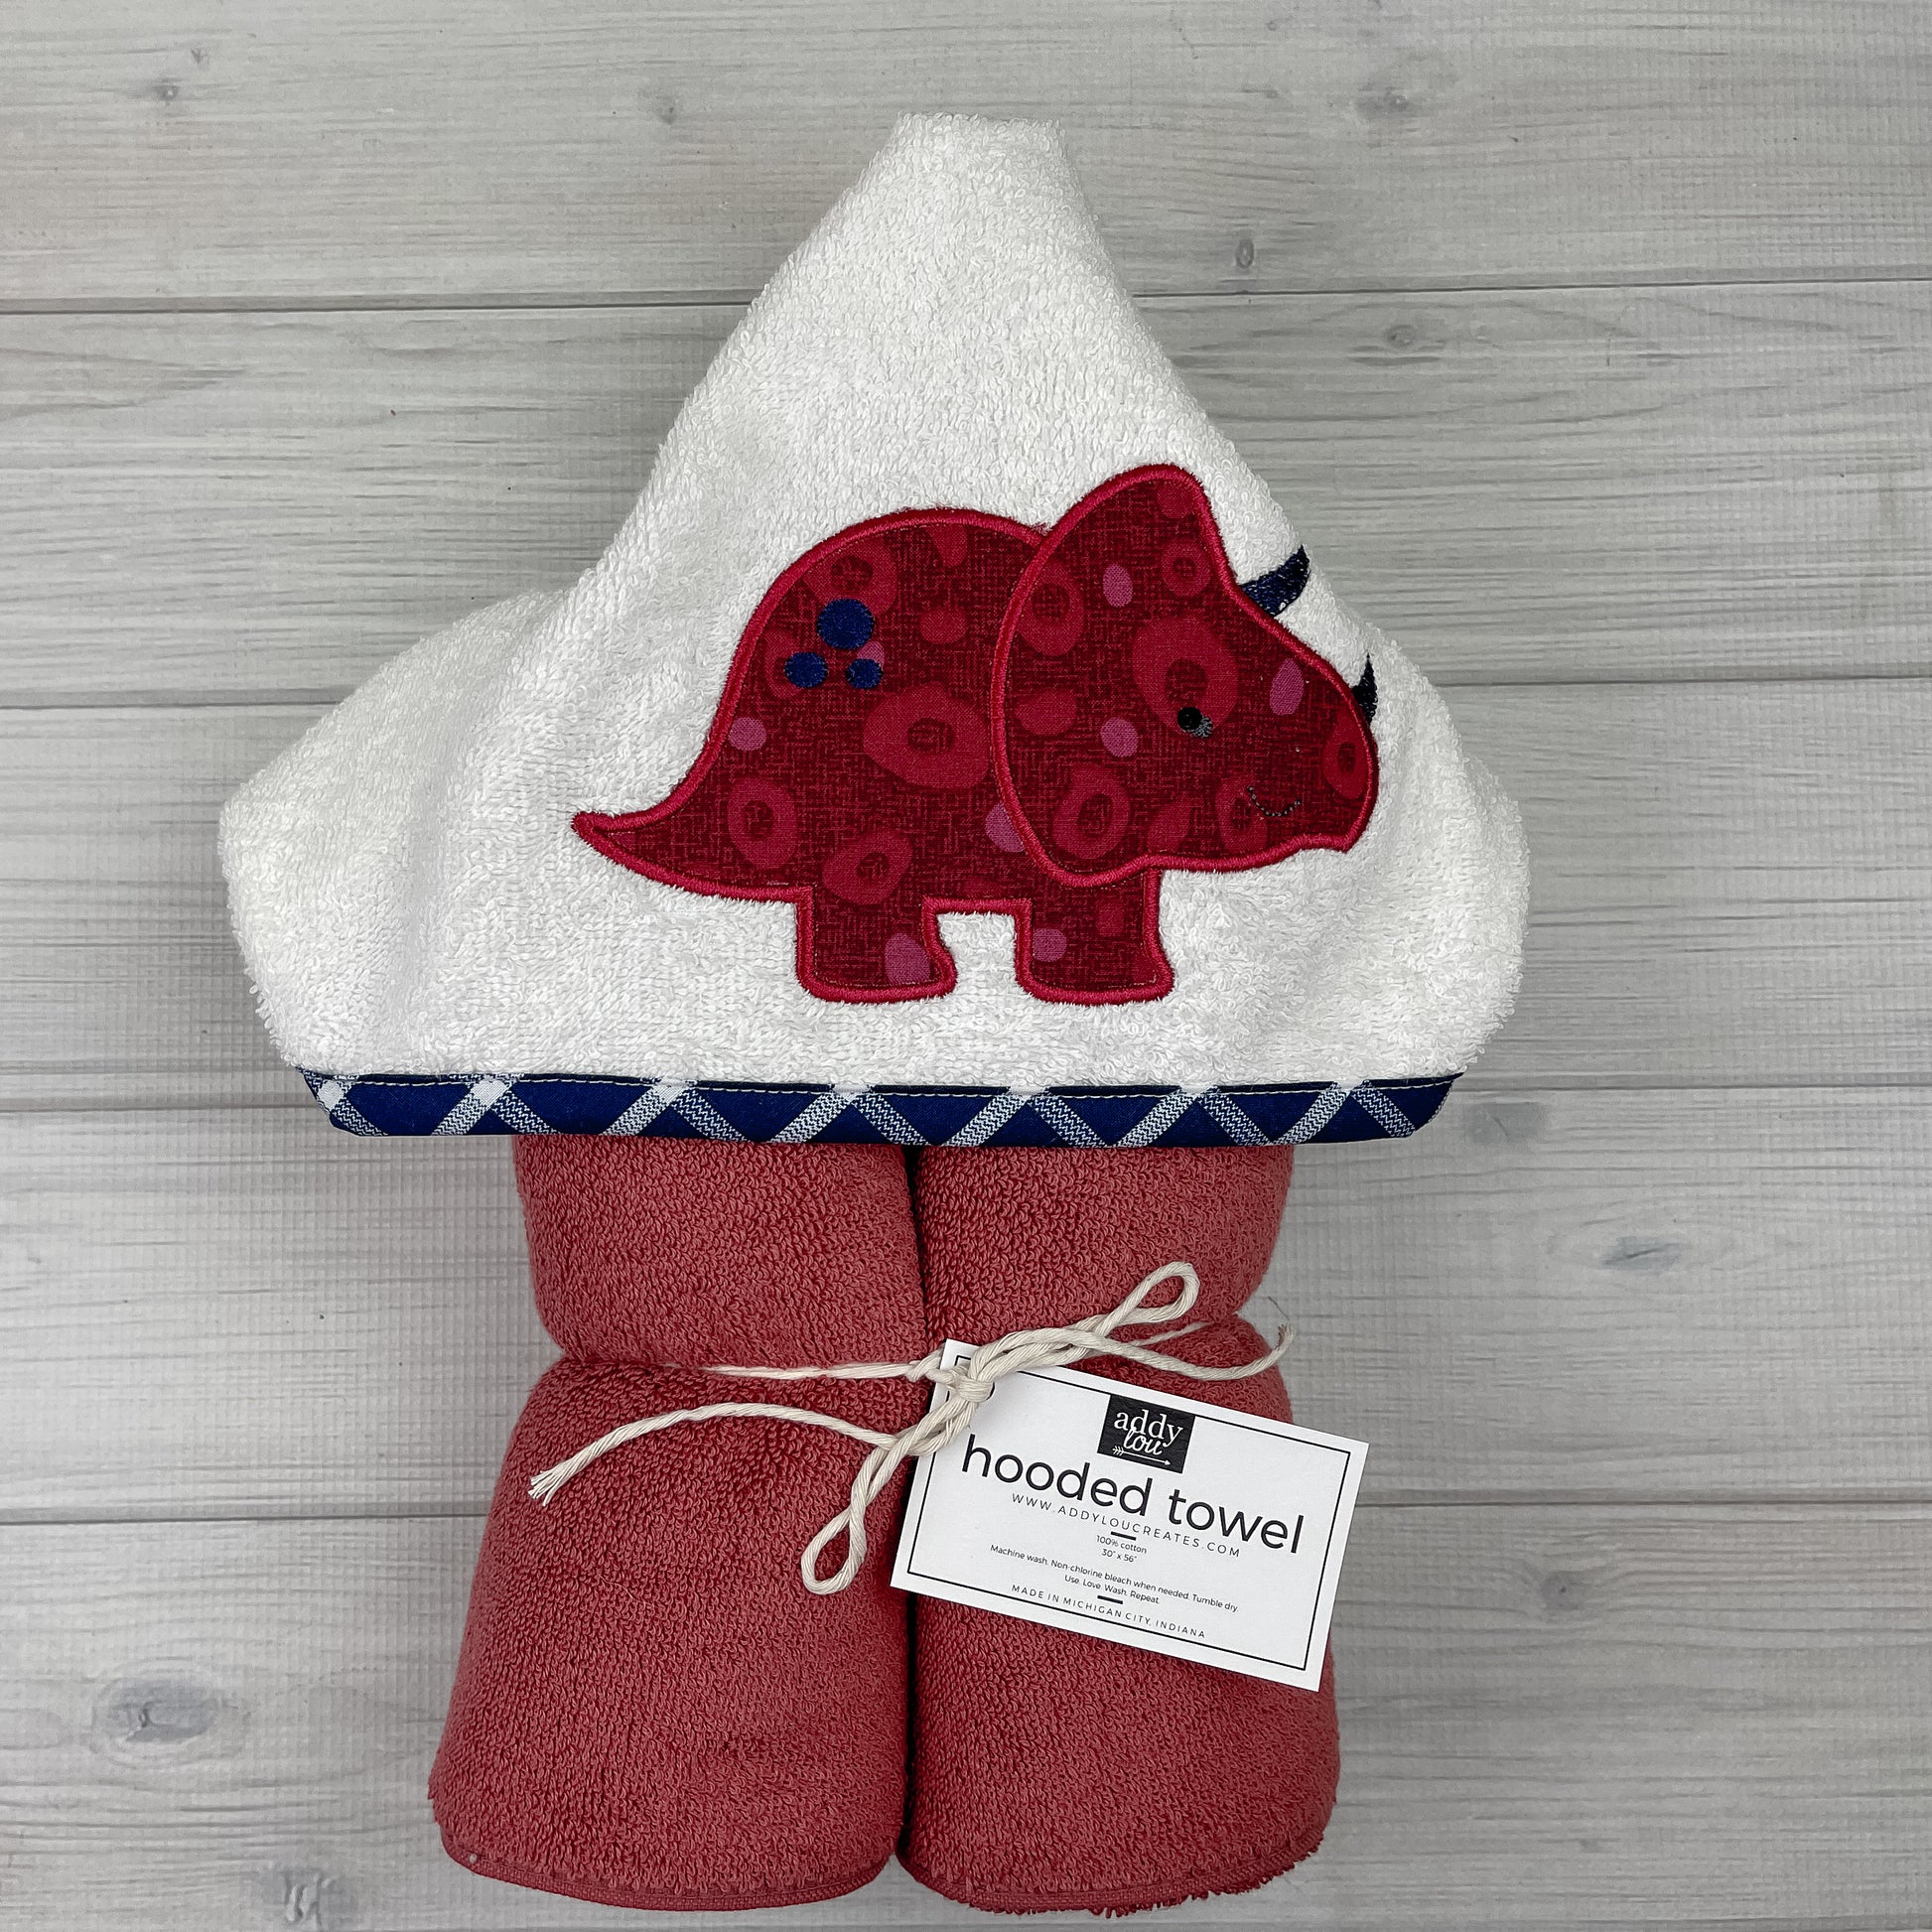 Dusty red hooded towel with red triceratops embroidered on a white hood.  Binding is navy blue and white plaid